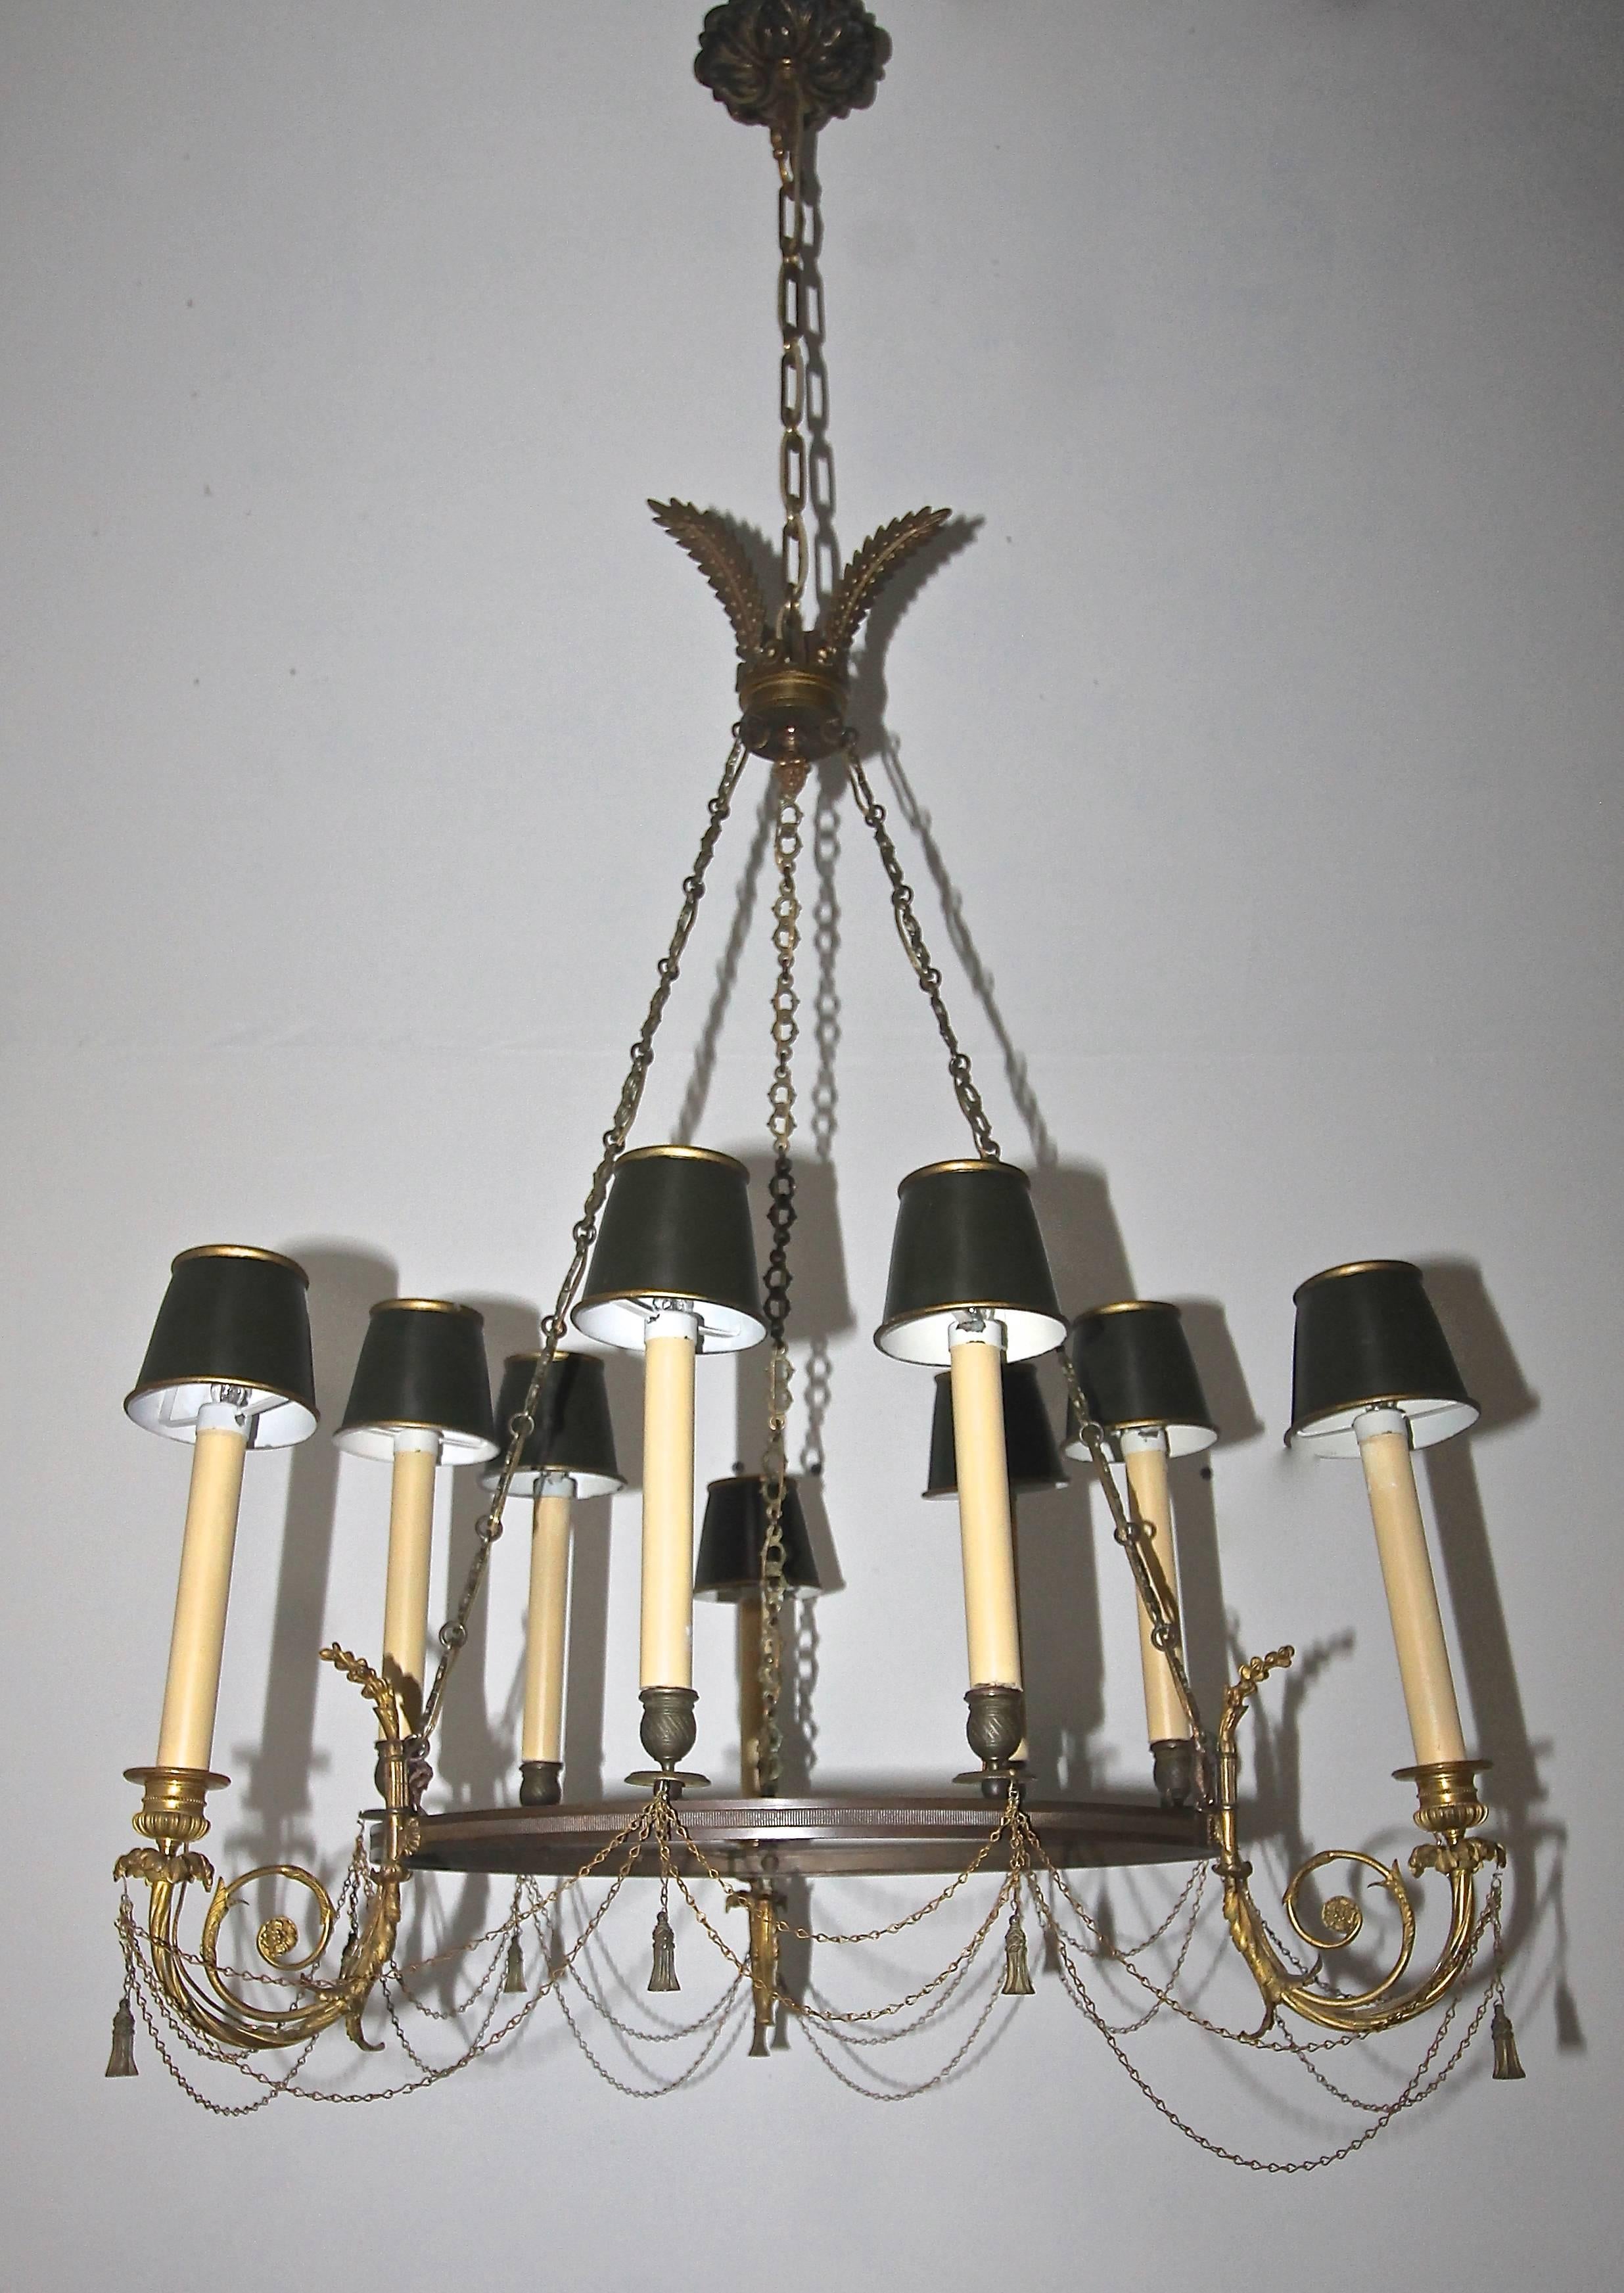 Beautifully detailed Empire style gilt bronze nine-light chandelier. Delicate and open construction with an atypical layout of candle cups resemble Baltic, Russian and Swedish of the time period. Finely detailed draped swags of chains and tassels